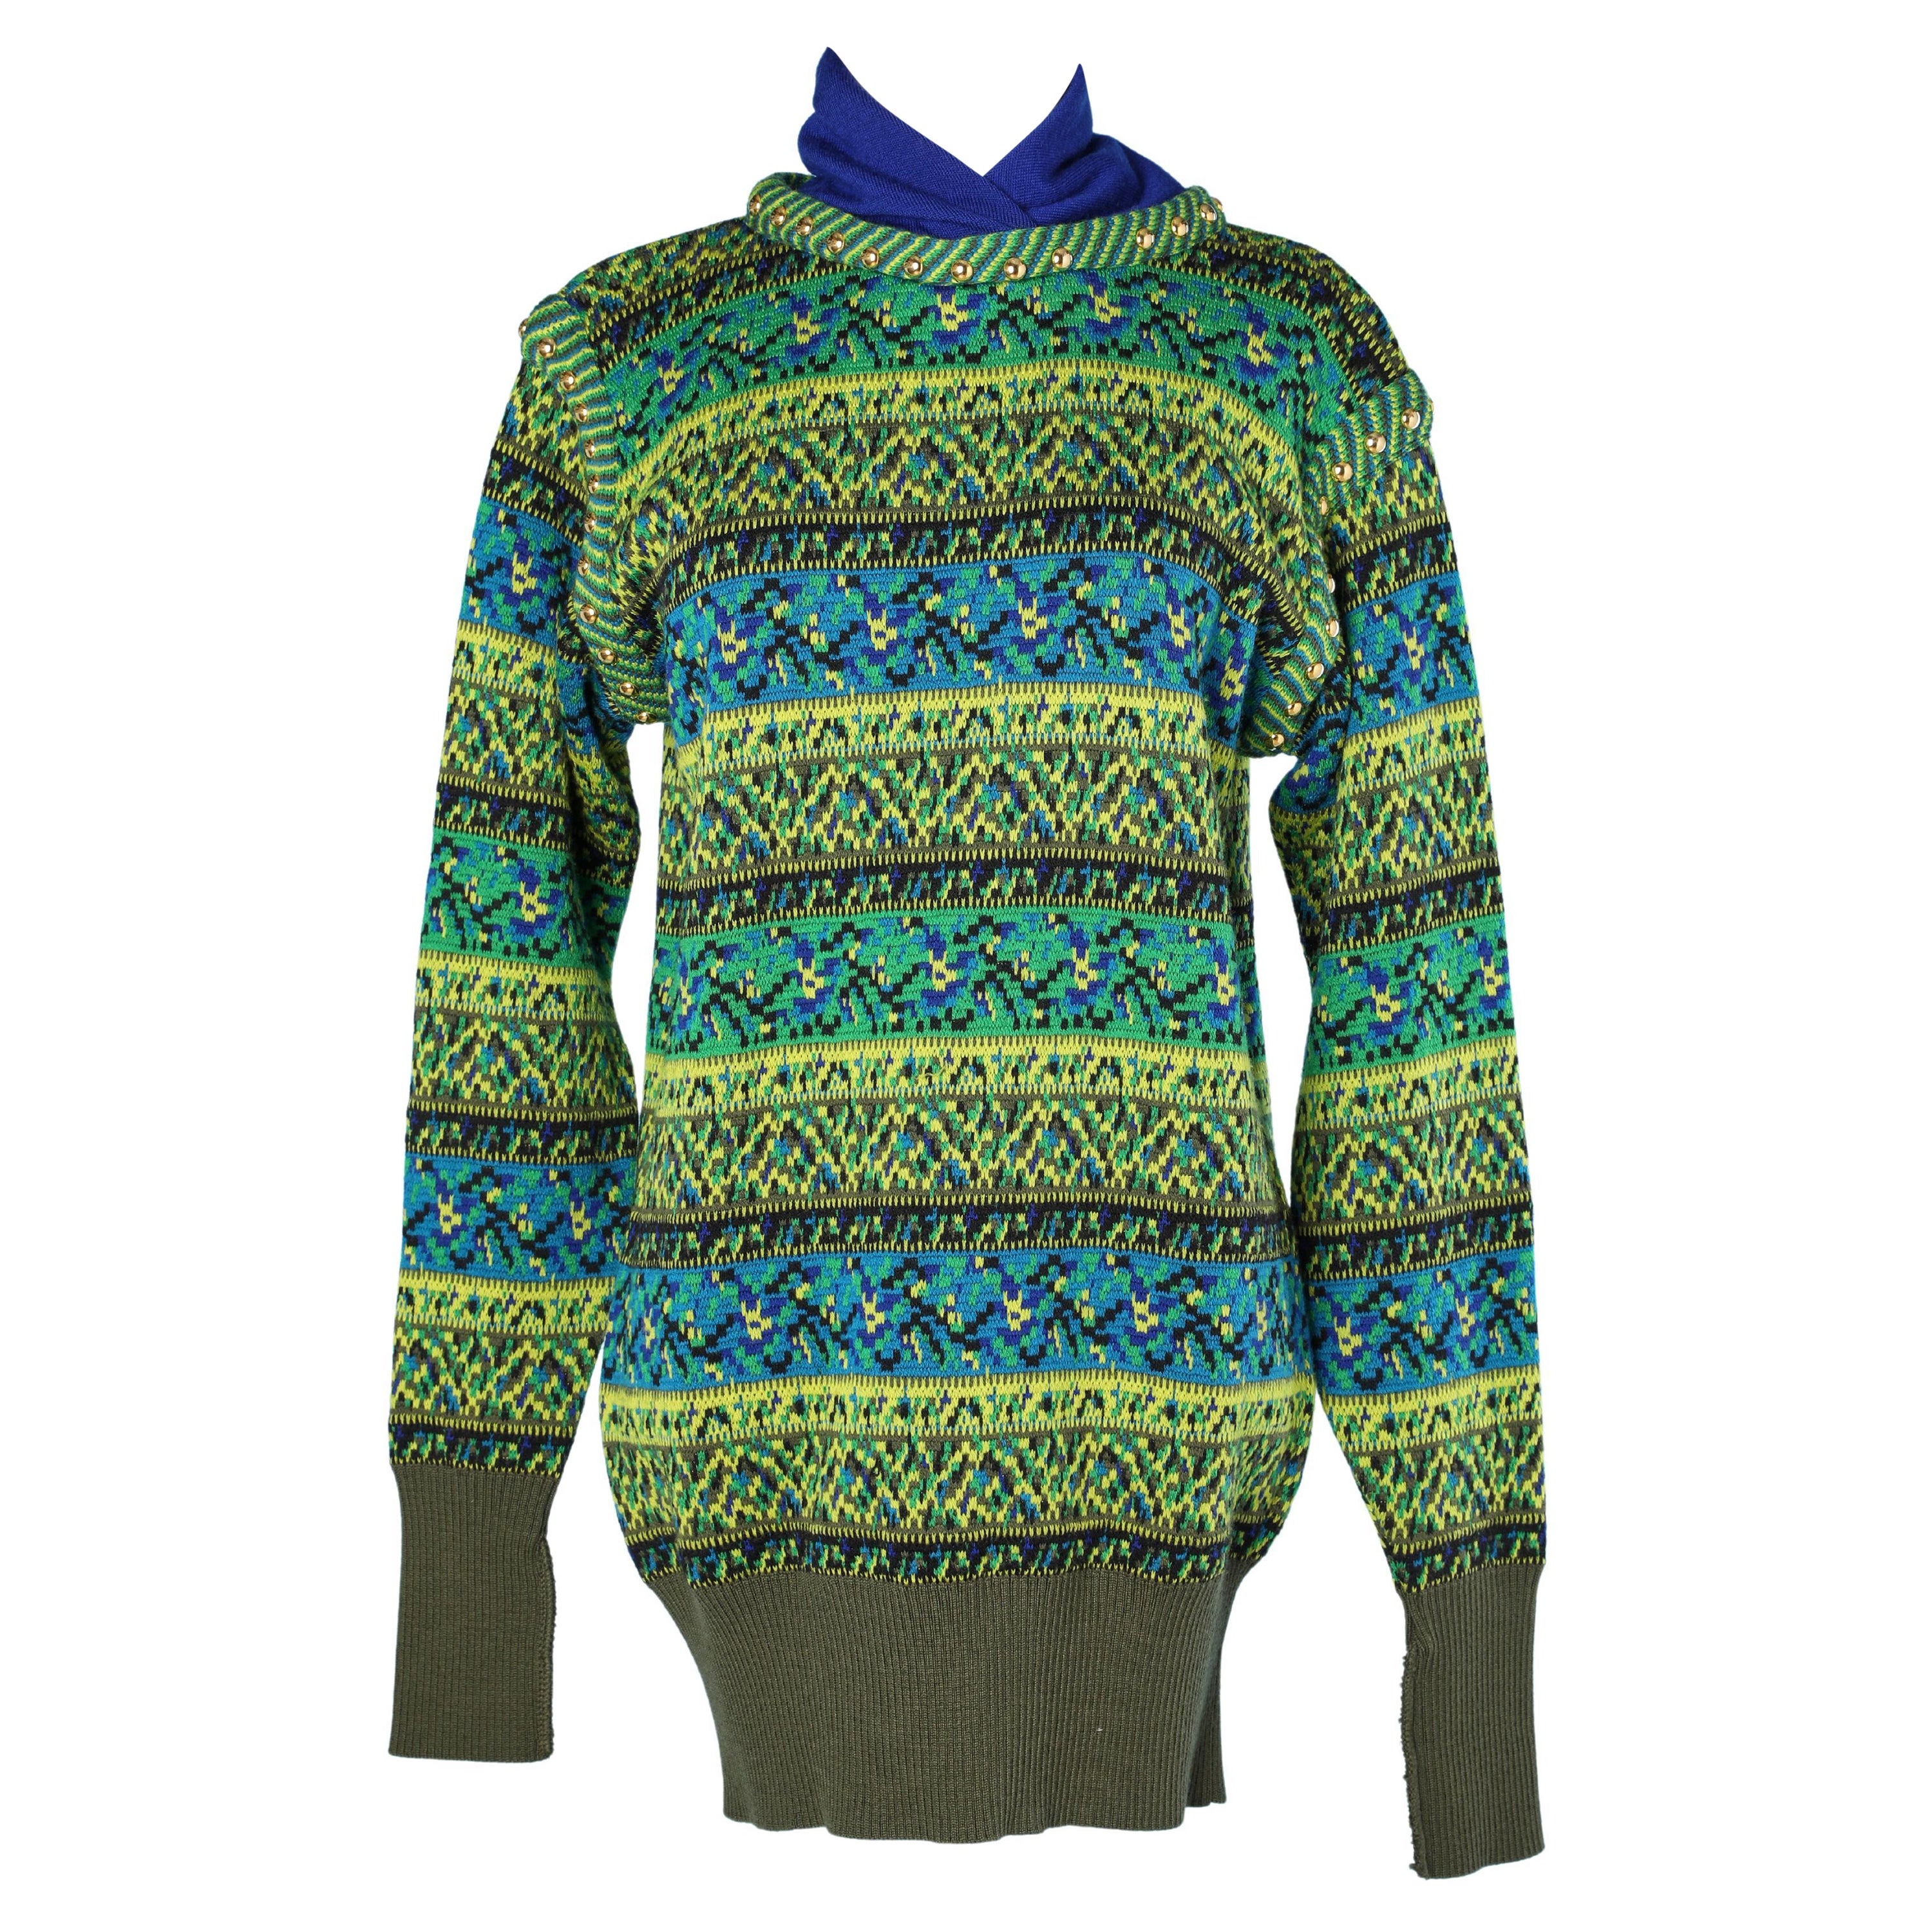 Blue and green jacquard sweater with gold studs Yves Saint Laurent Rive Gauche  For Sale